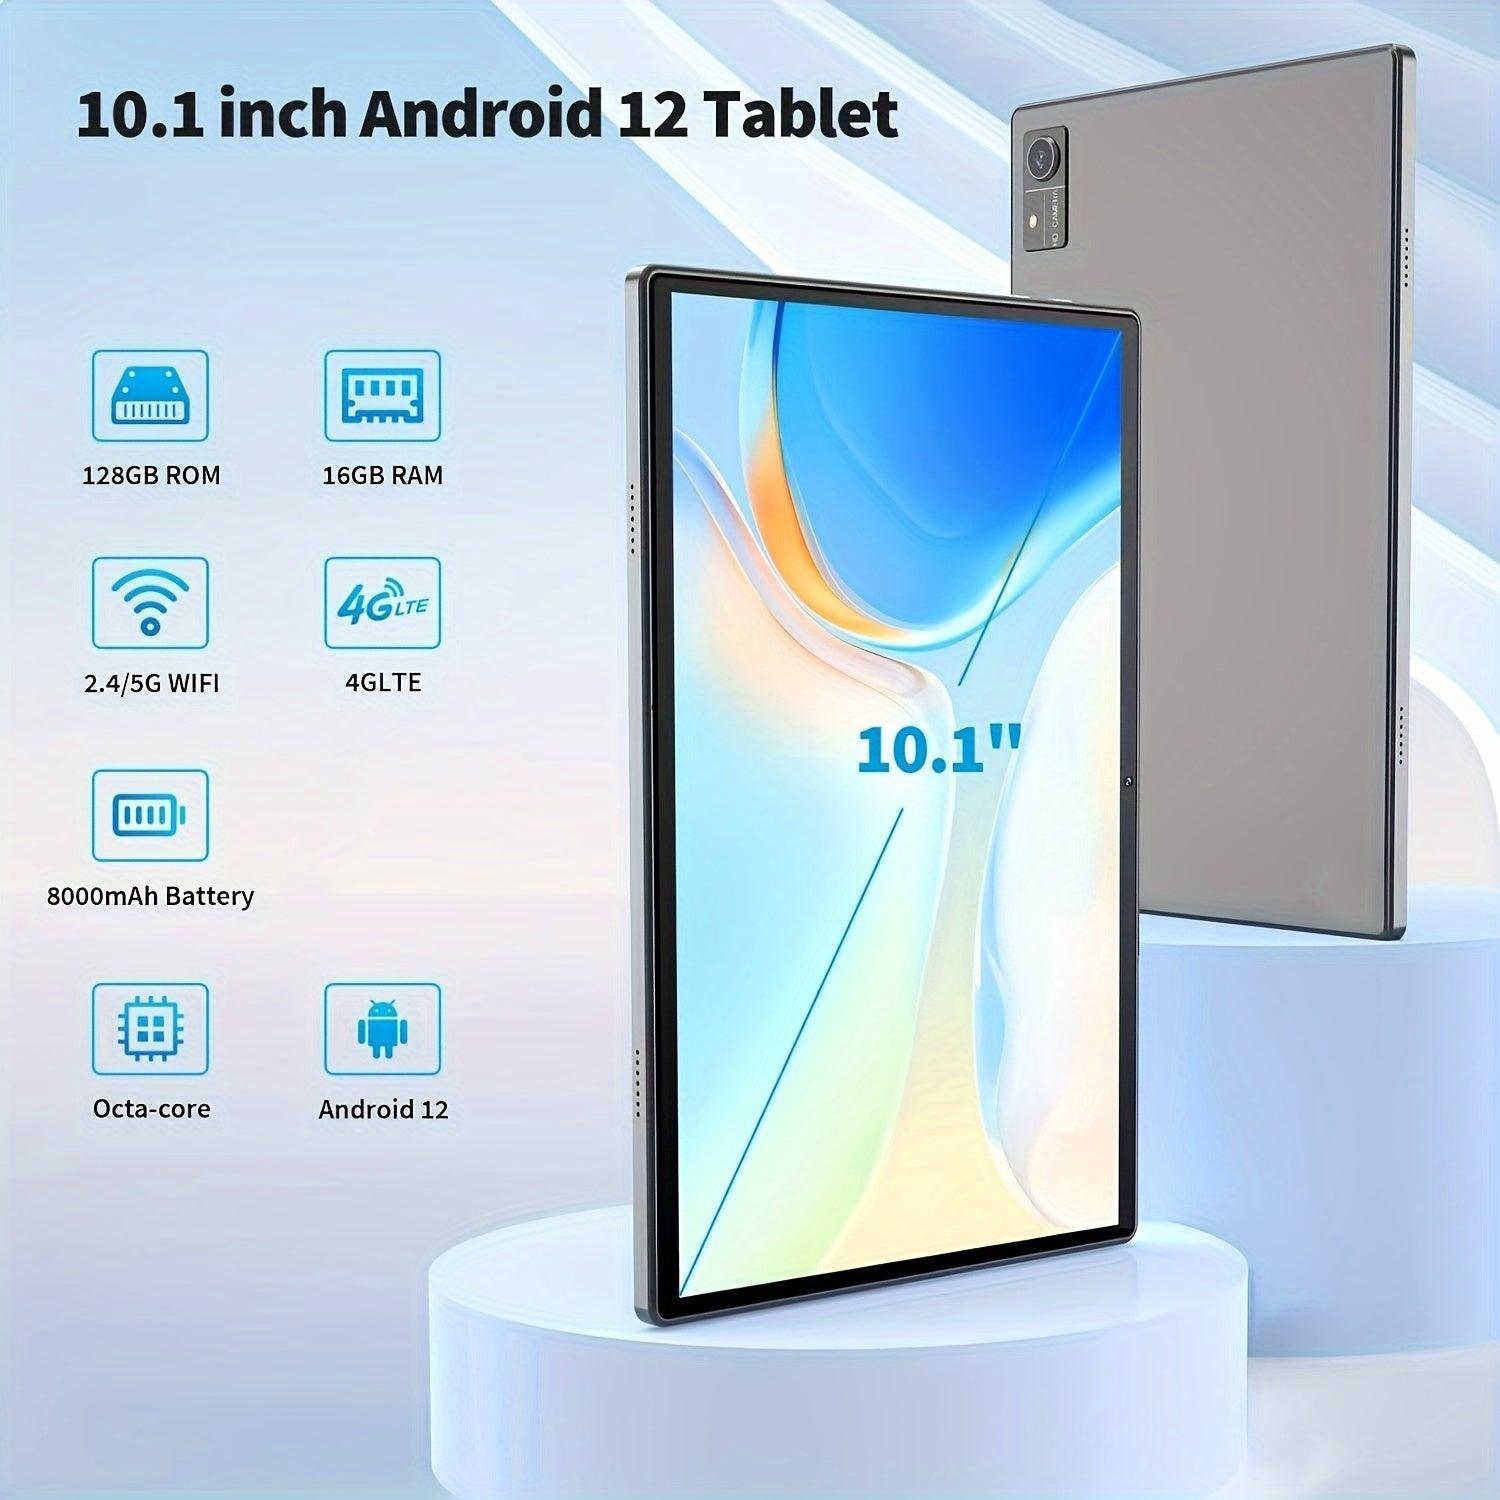 Android Tablet 10 Inch, 16GB RAM 128GB ROM, 1TB Expand, Android 12 Tablet With Octa-Core, 5G WiFi, 4G/LTE, 8000mAh Battery, Wireless 5.0, FHD Screen, GMS Certified, GPS - Rexpect Nerd